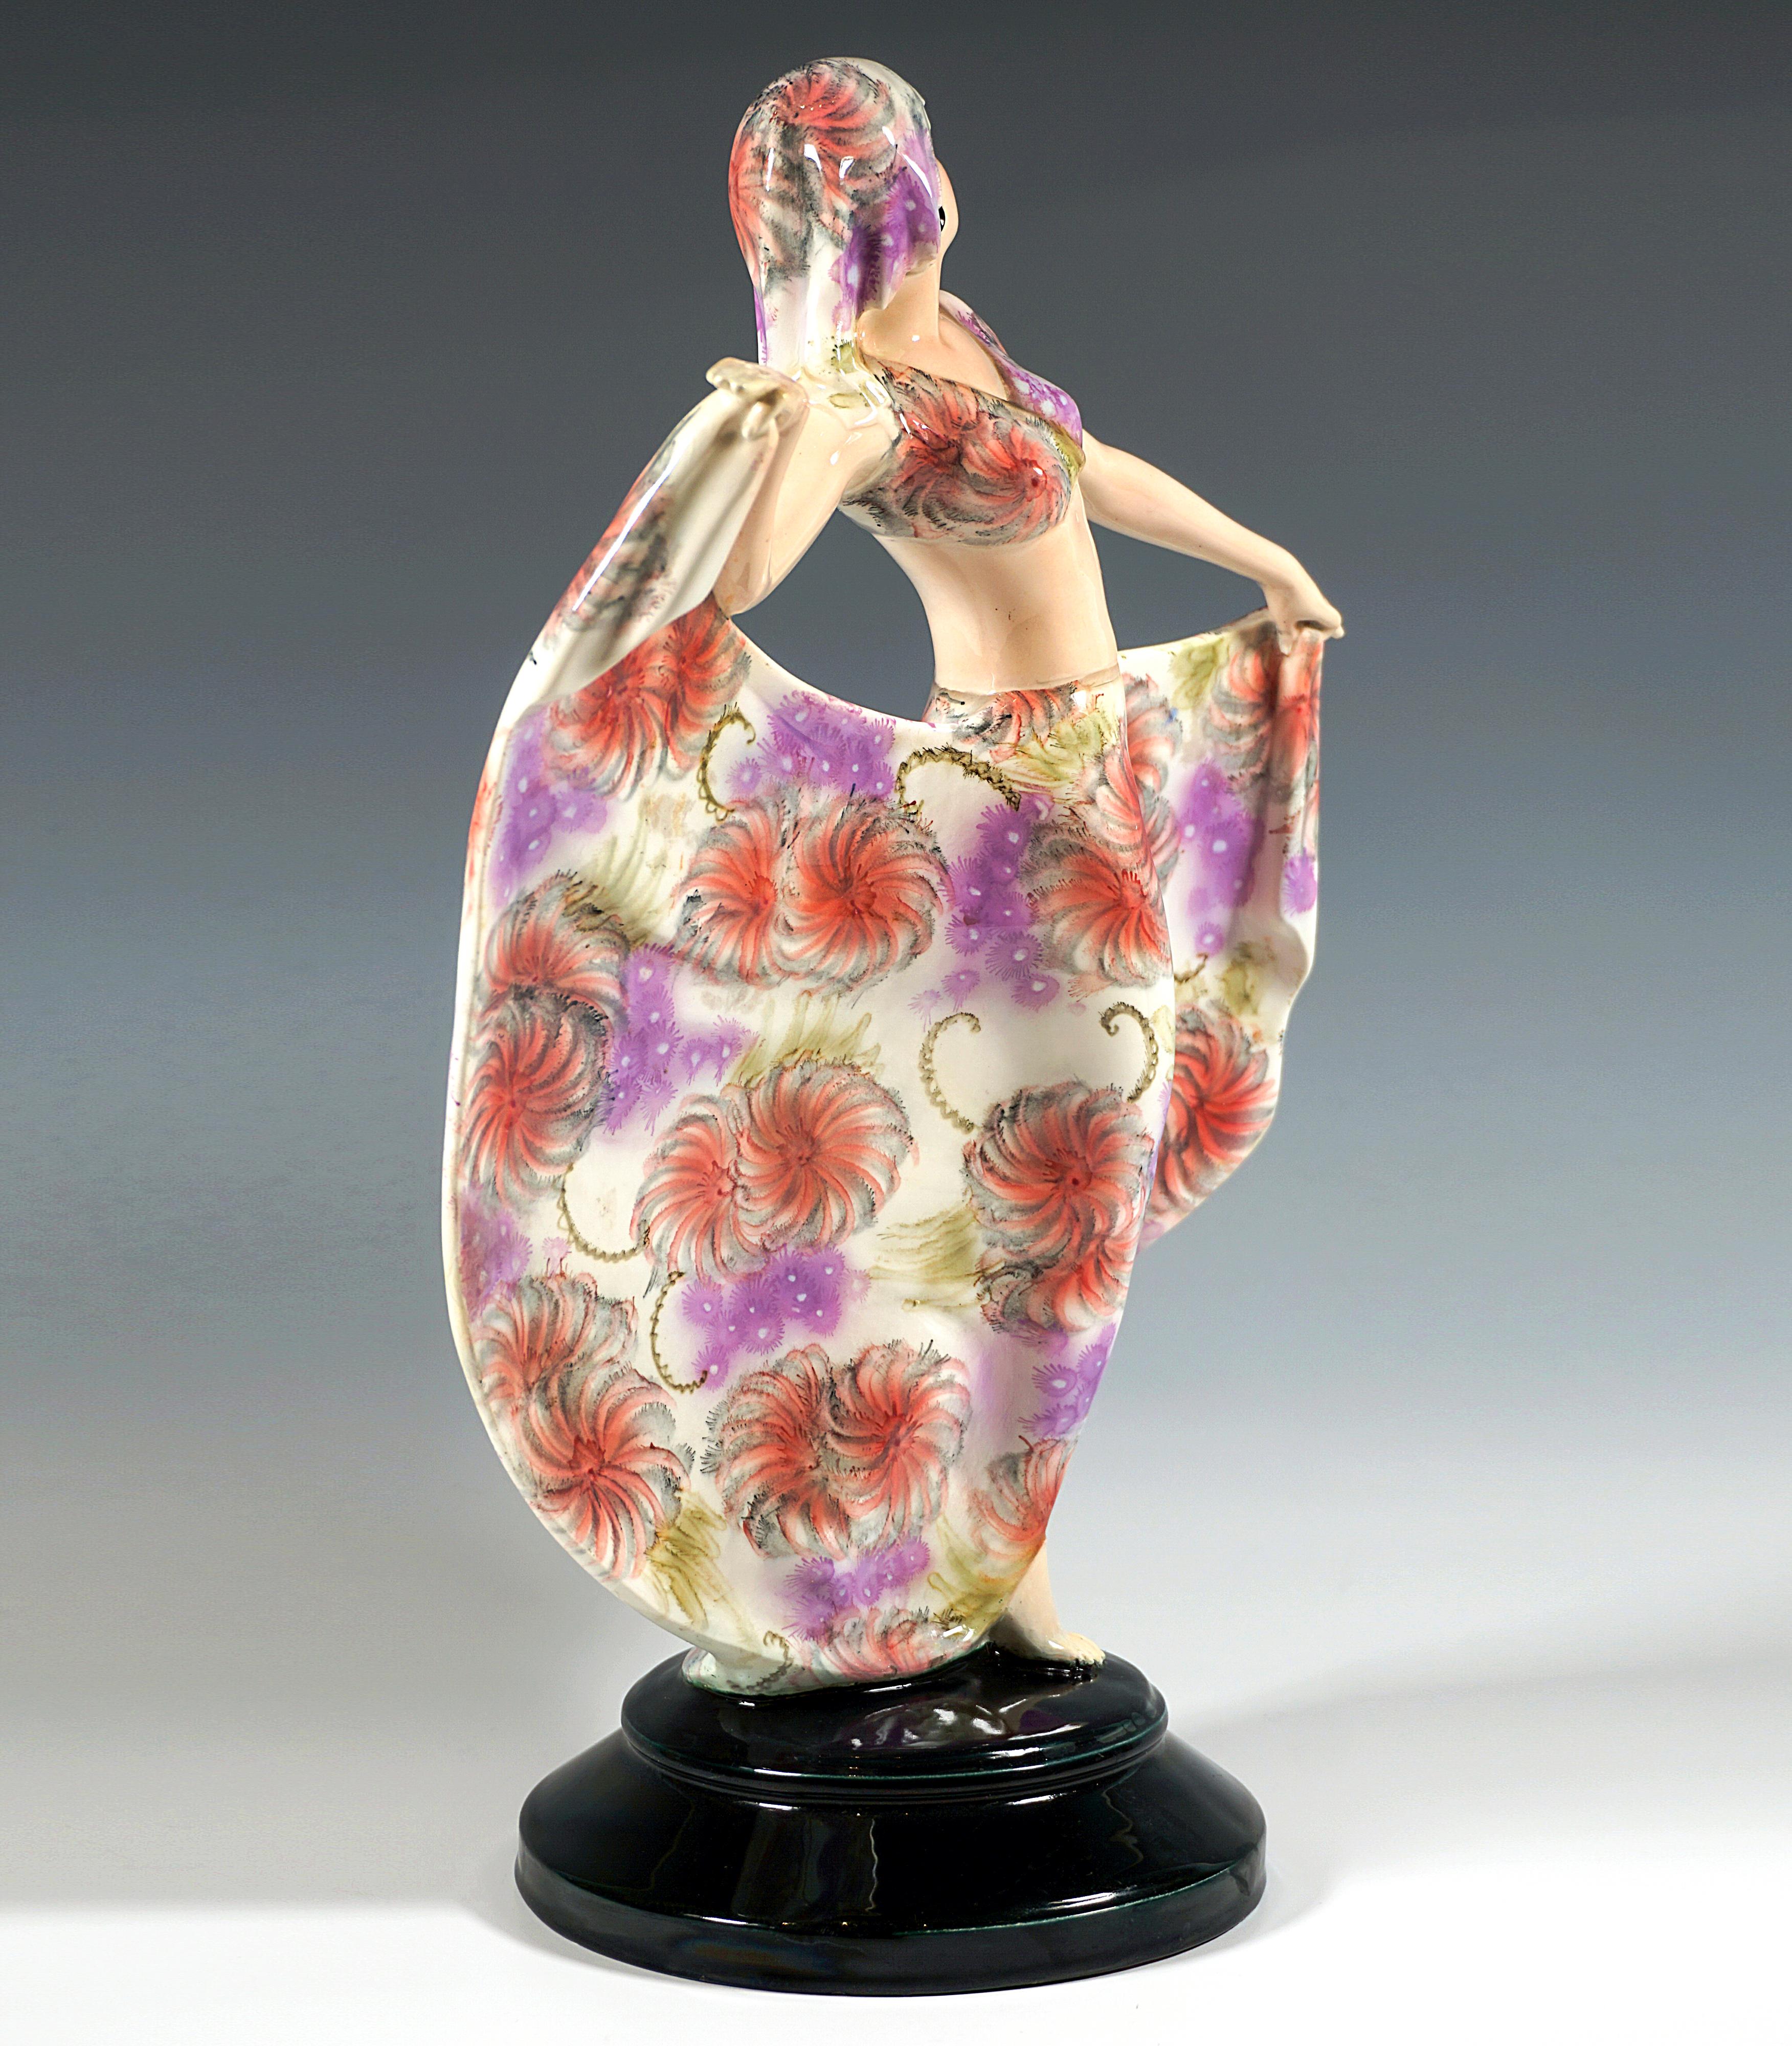 Rare Goldscheider Art Deco ceramic figure of the 1920's: 
Posing, graceful dancer in oriental costume: short-sleeved, belly-free top, floor-length, wide skirt and headscarf playing around the expressively painted face, all pieces of clothing with